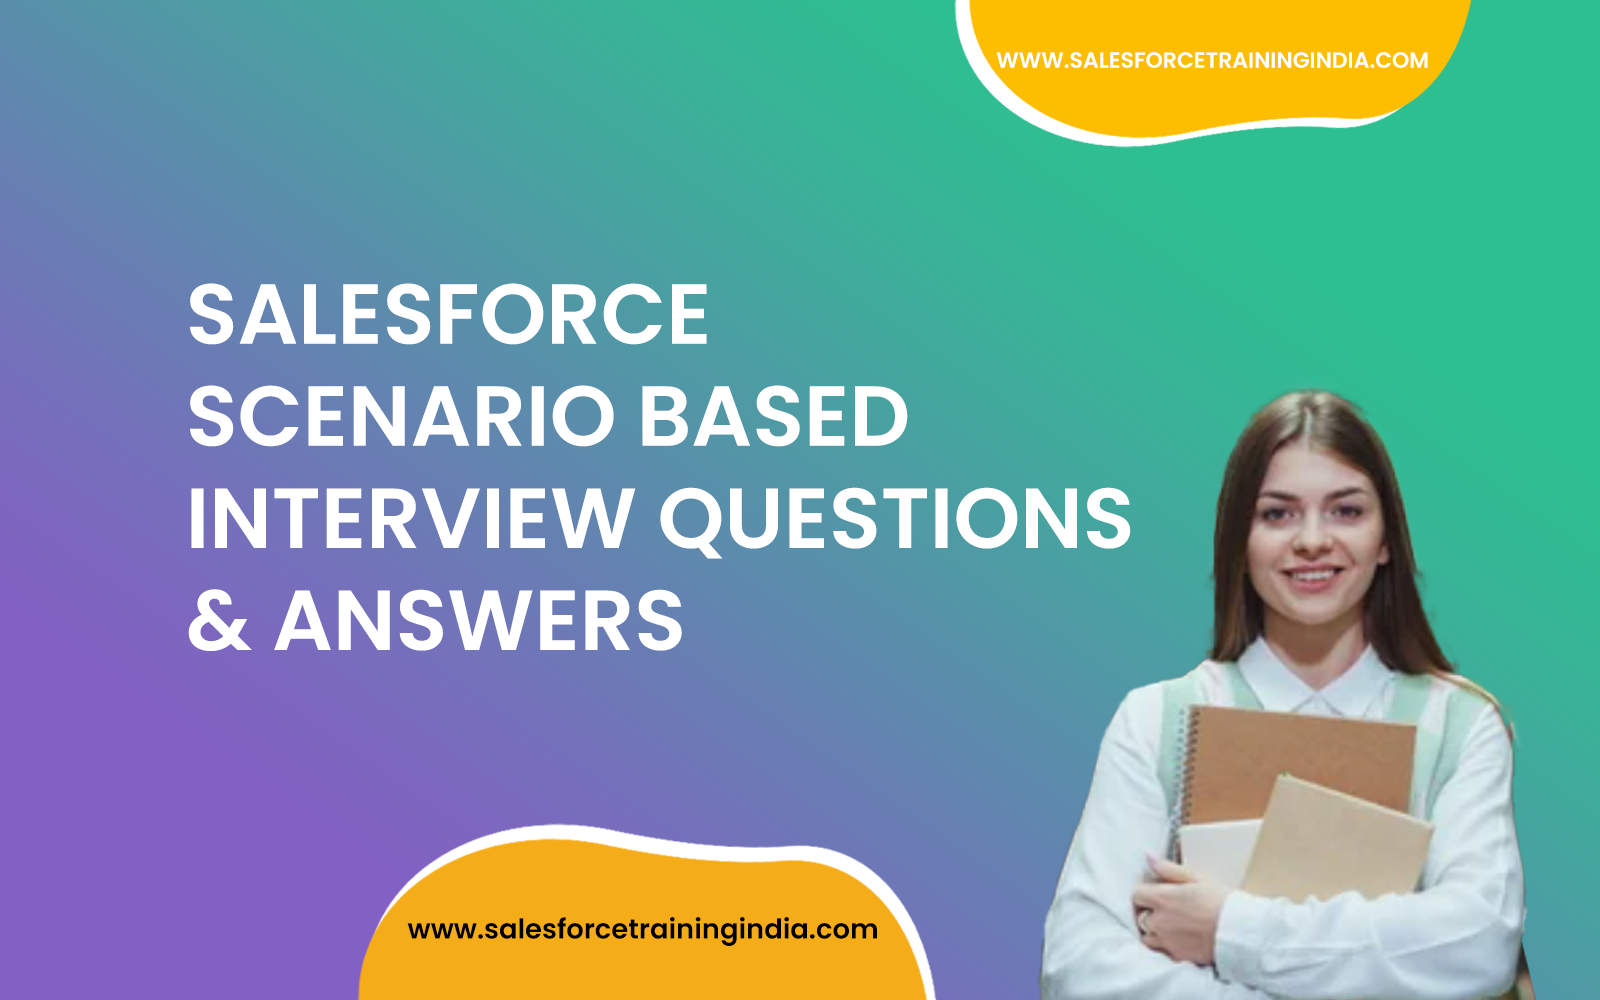 Salesforce Scenario Based Interview Questions & Answers